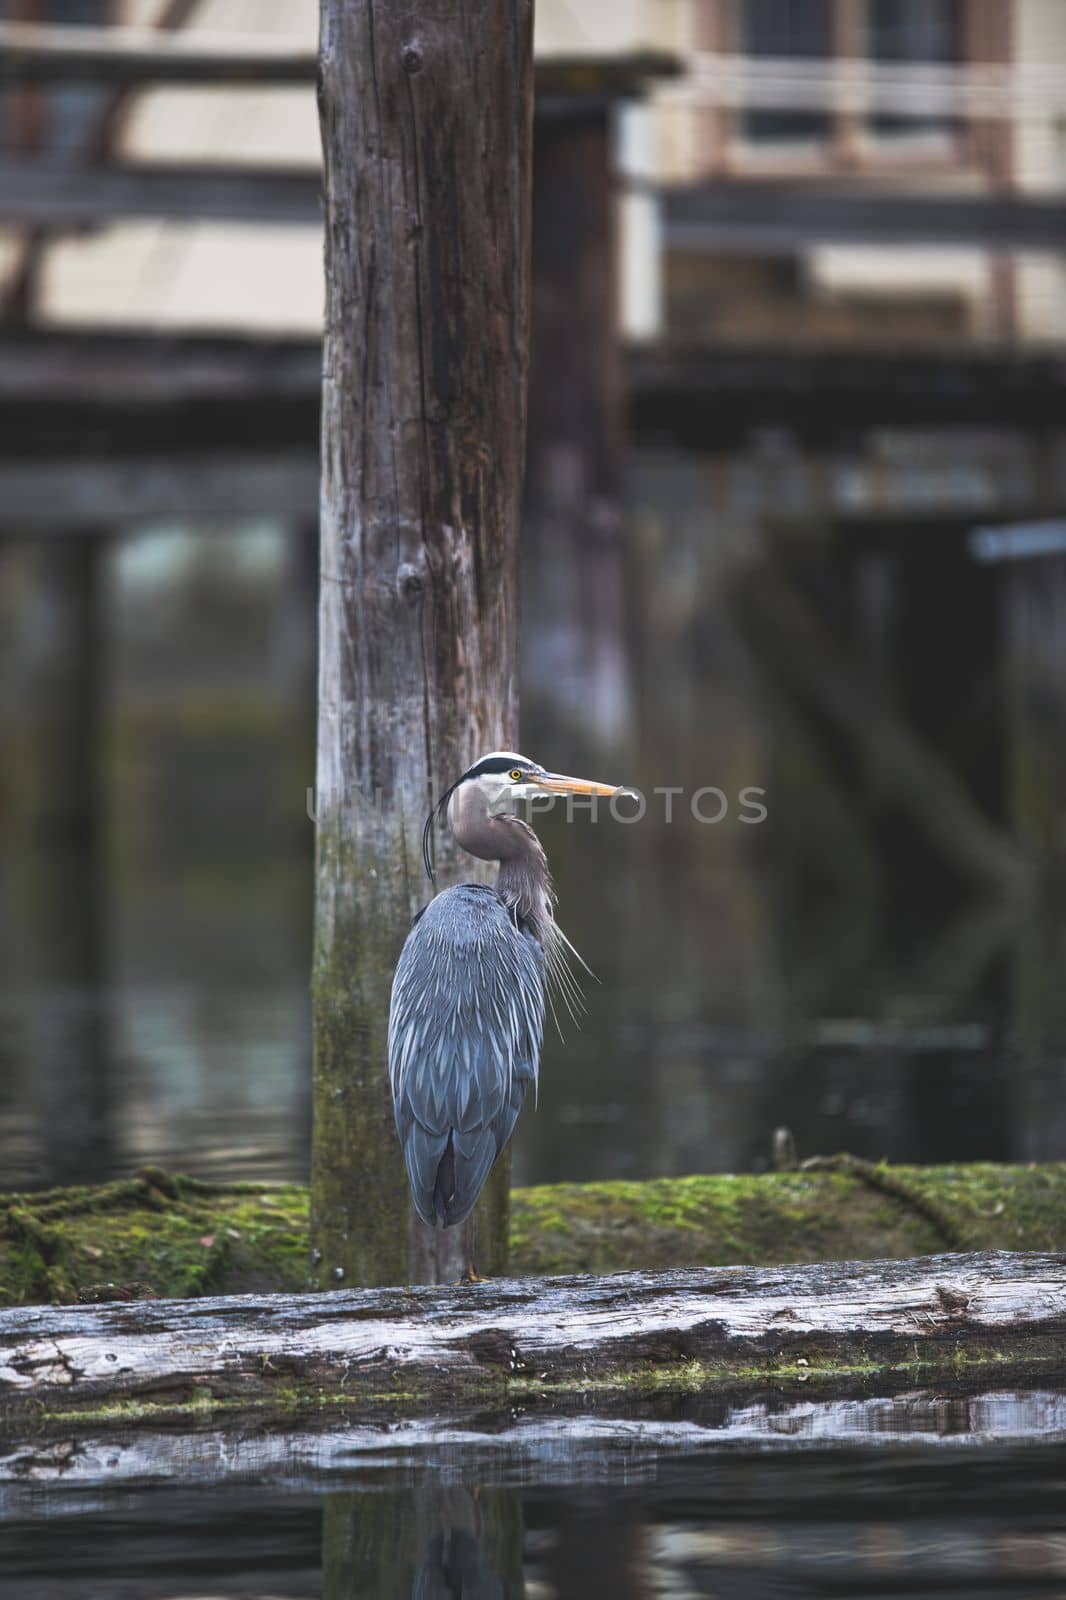 A Great Blue Heron standing on a log while looking around by Granchinho